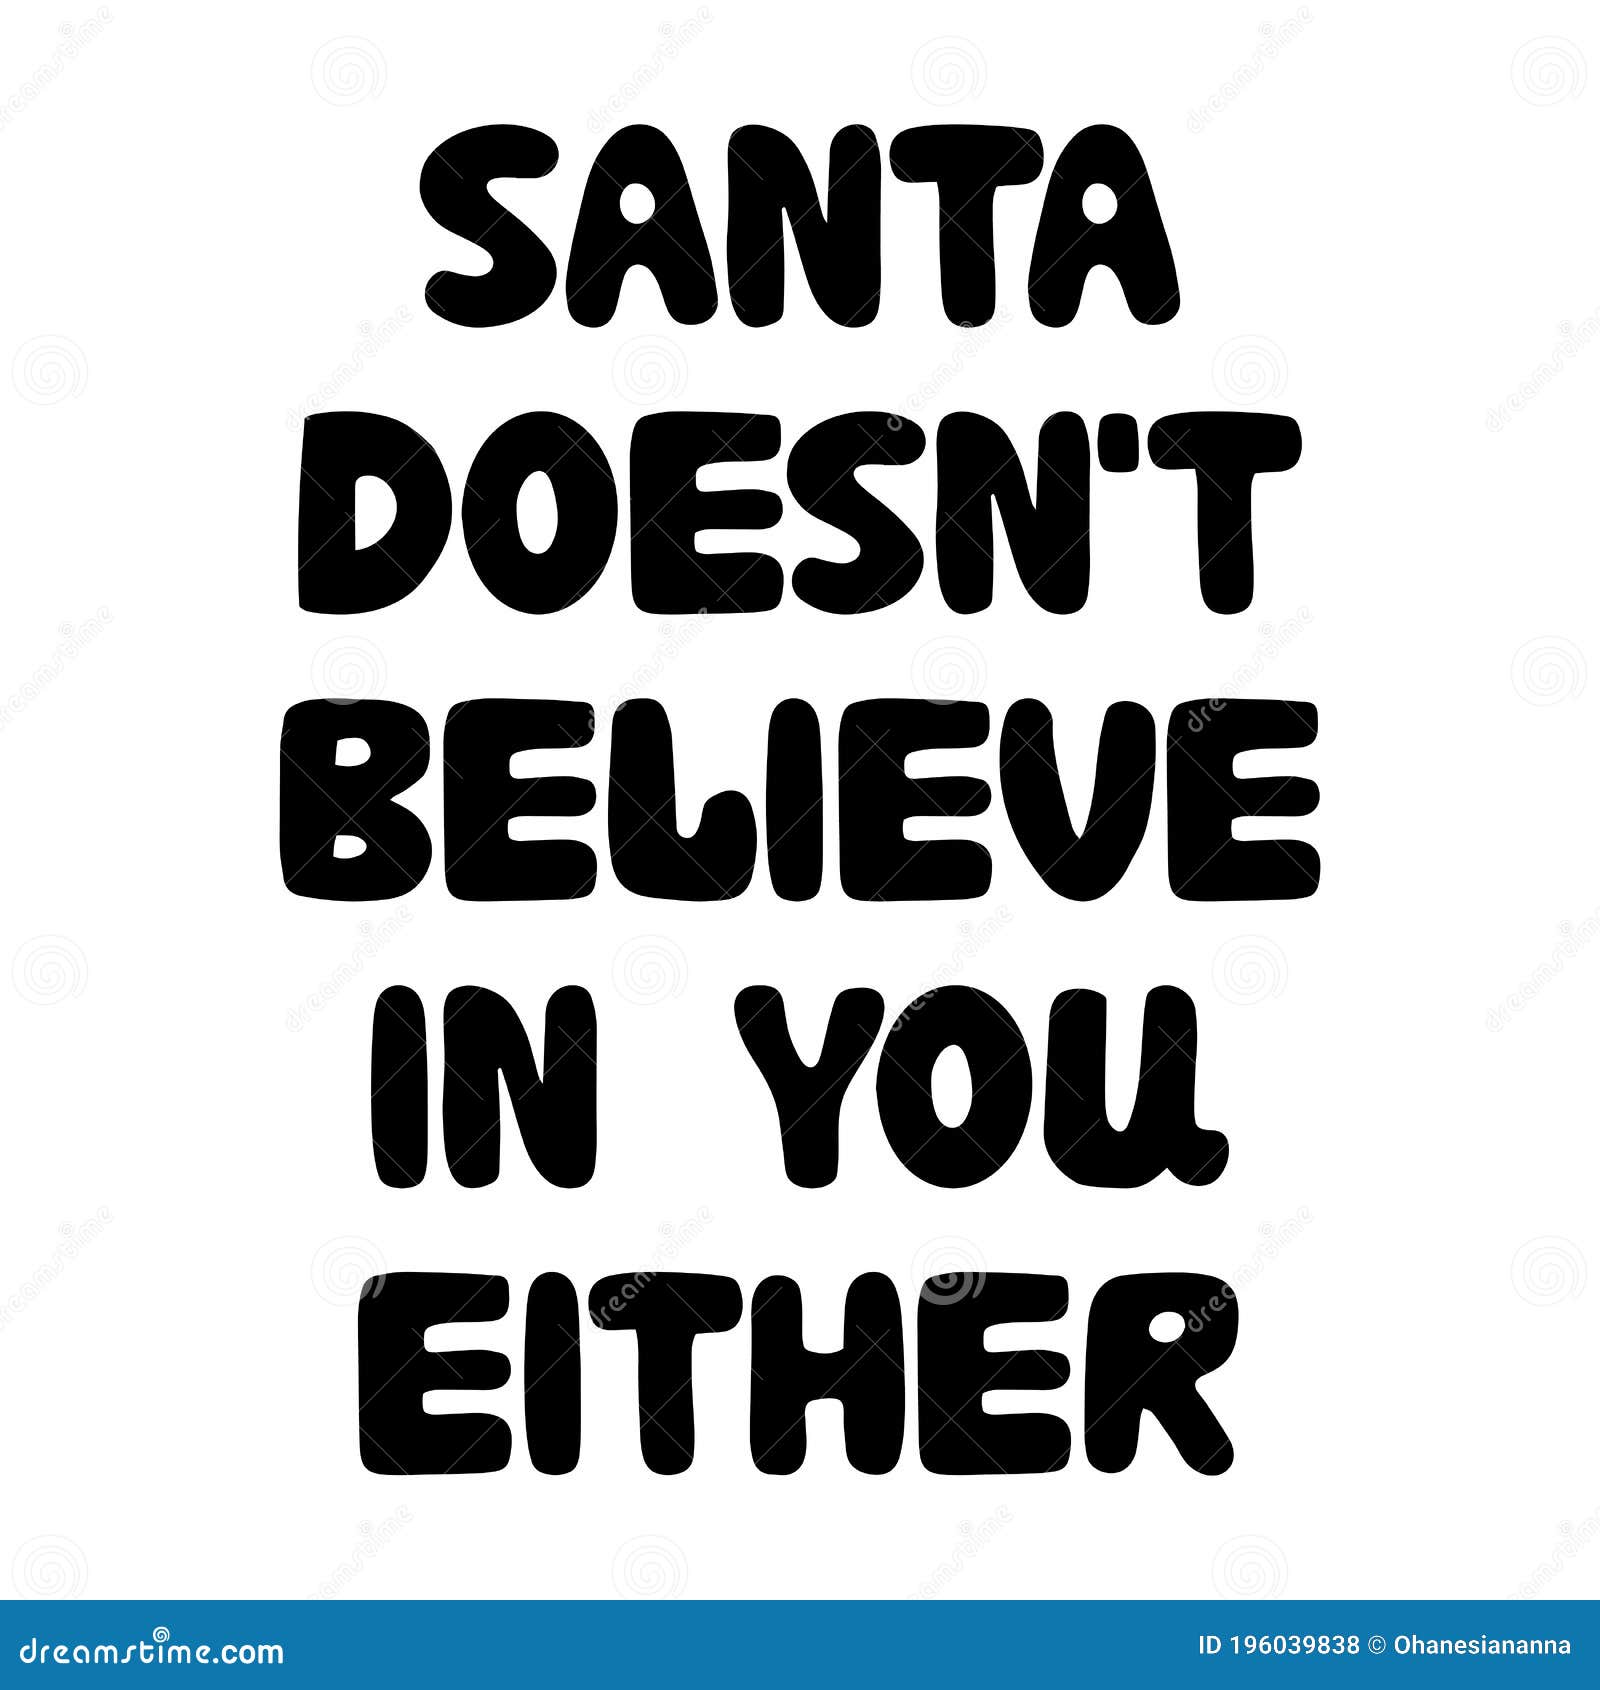 Santa Does Not Believe in You Either. Funny Christmas Phrase. Can Be